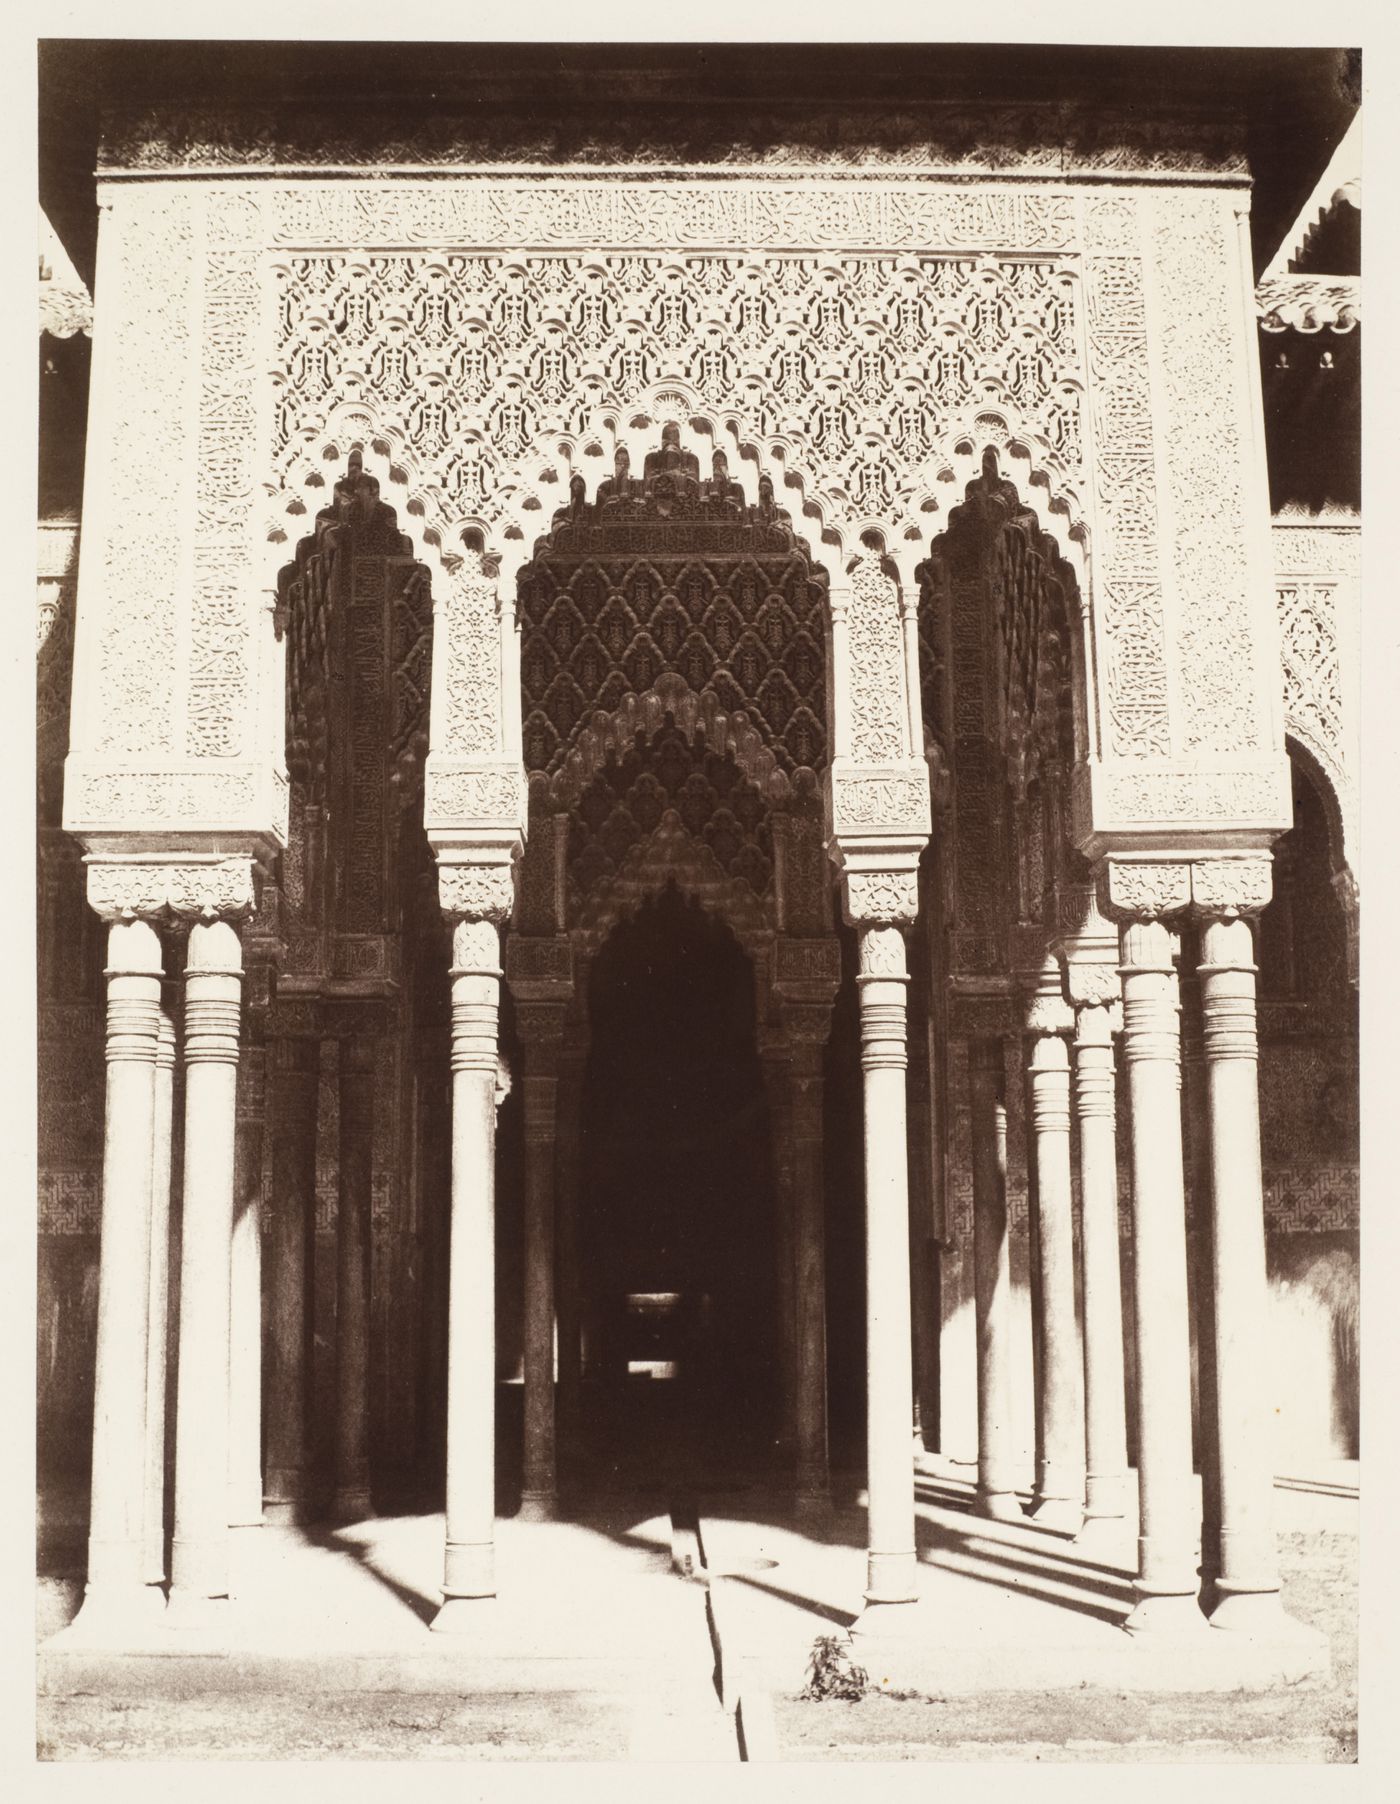 View of the colonnade at the rear of the Court of Lions [Patio de los Leones], Alhambra, Granada, Spain